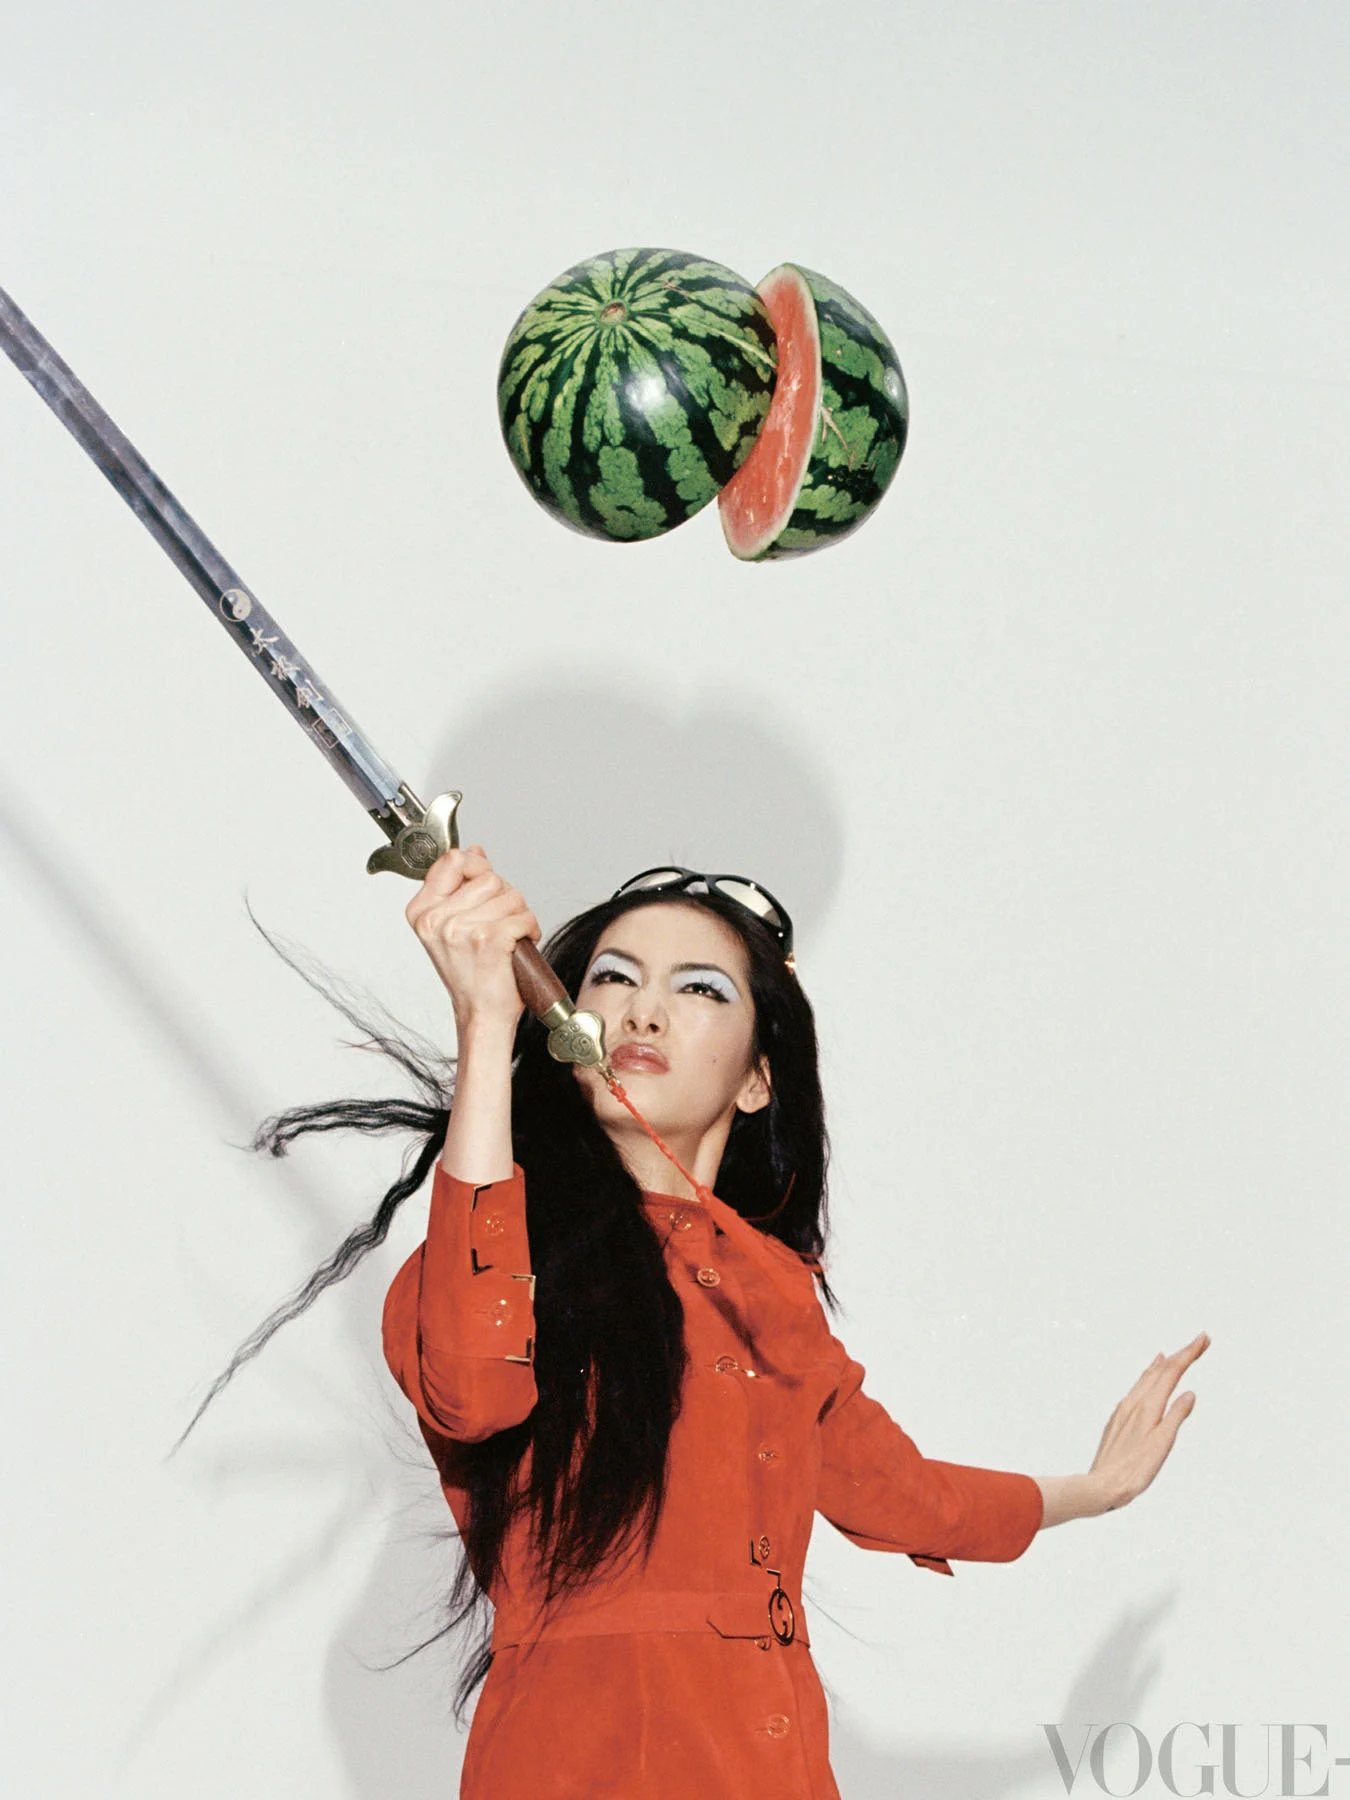 A photograph of model Cici splitting a watermelon in half with an iron sword.